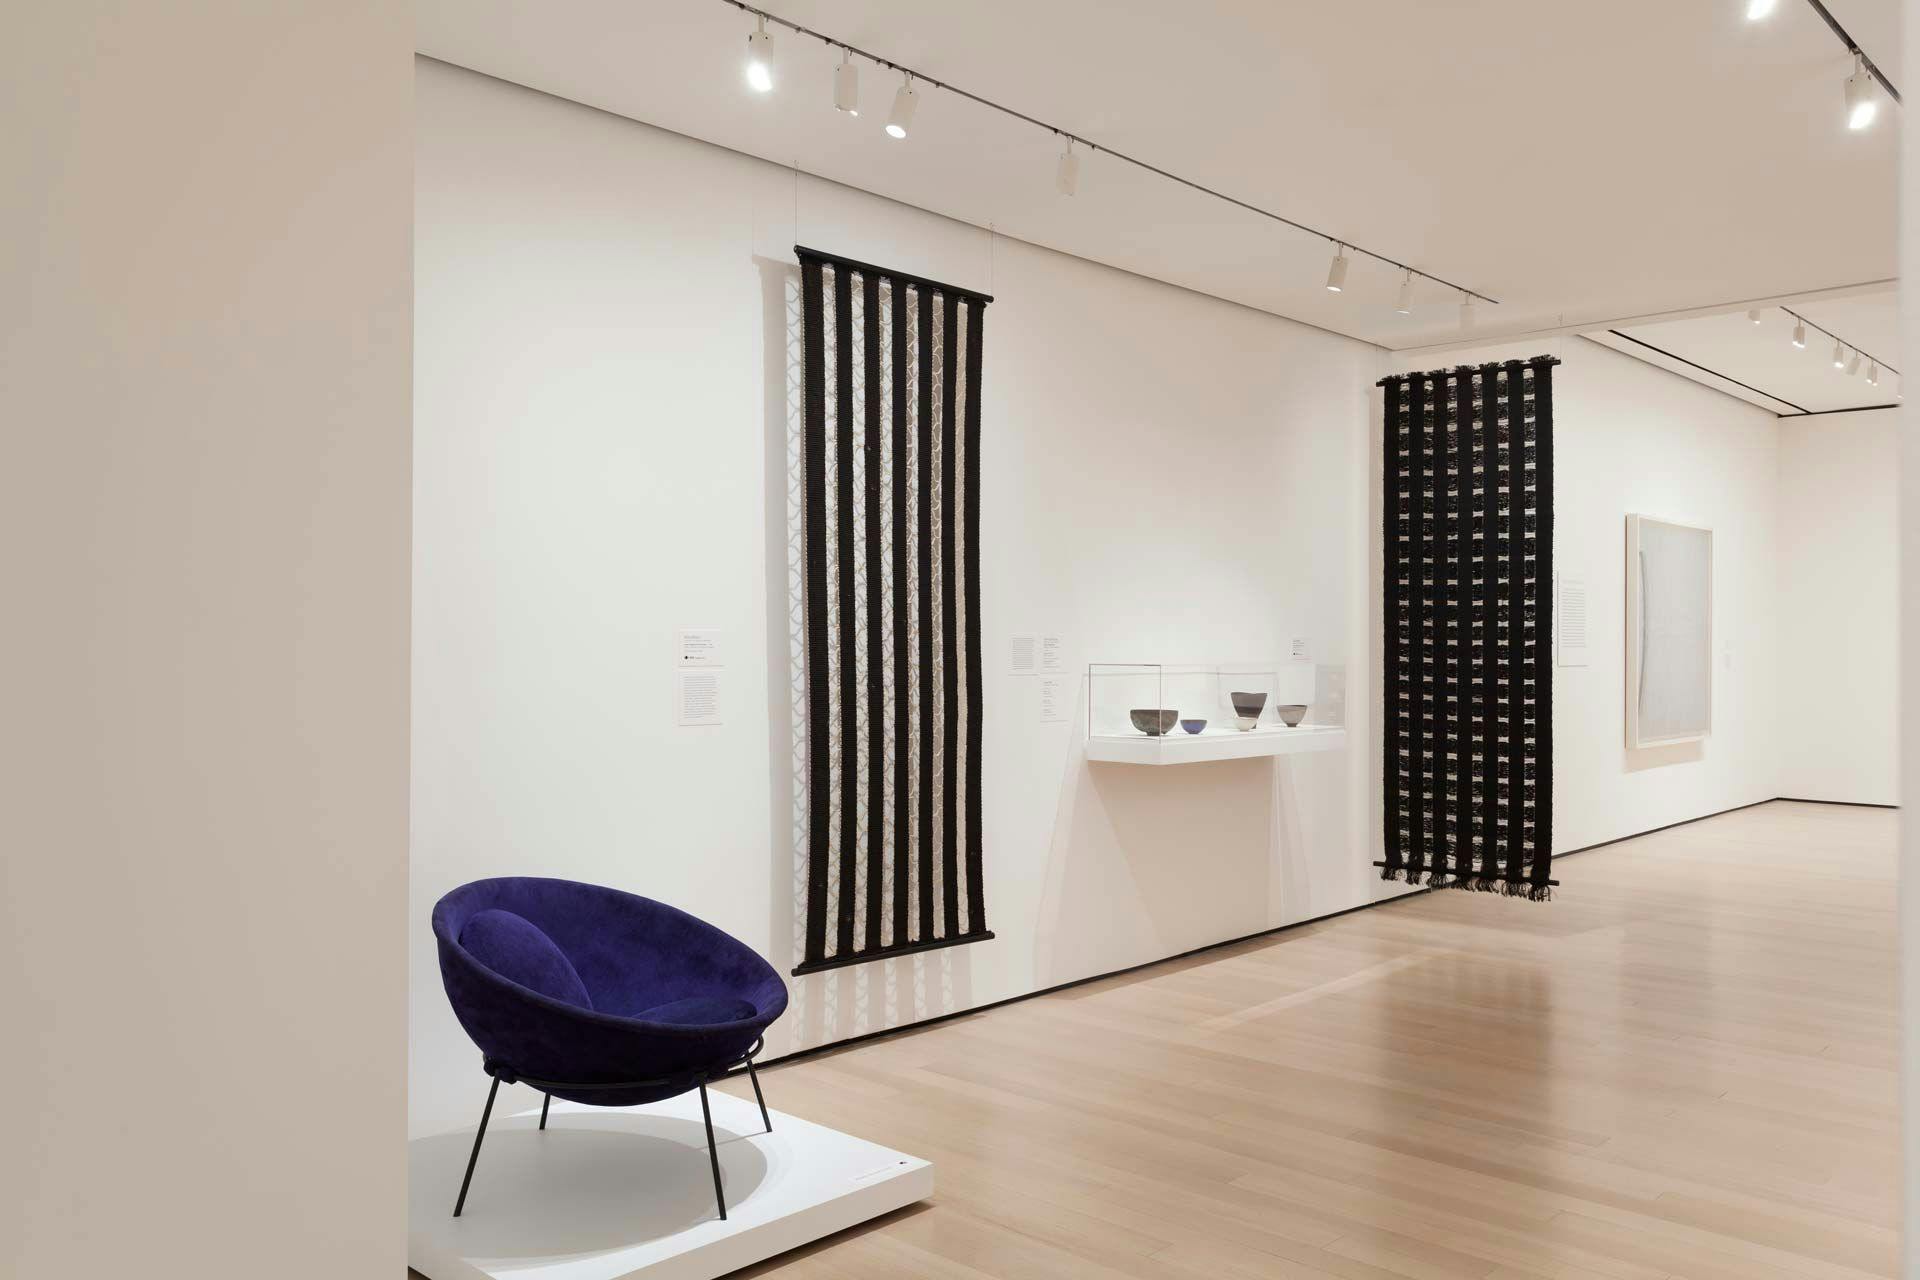 Installation view of work by Anni Albers in the exhibition Making Space: Women Artists and Postwar Abstraction at The Museum of Modern Art dated 2017.